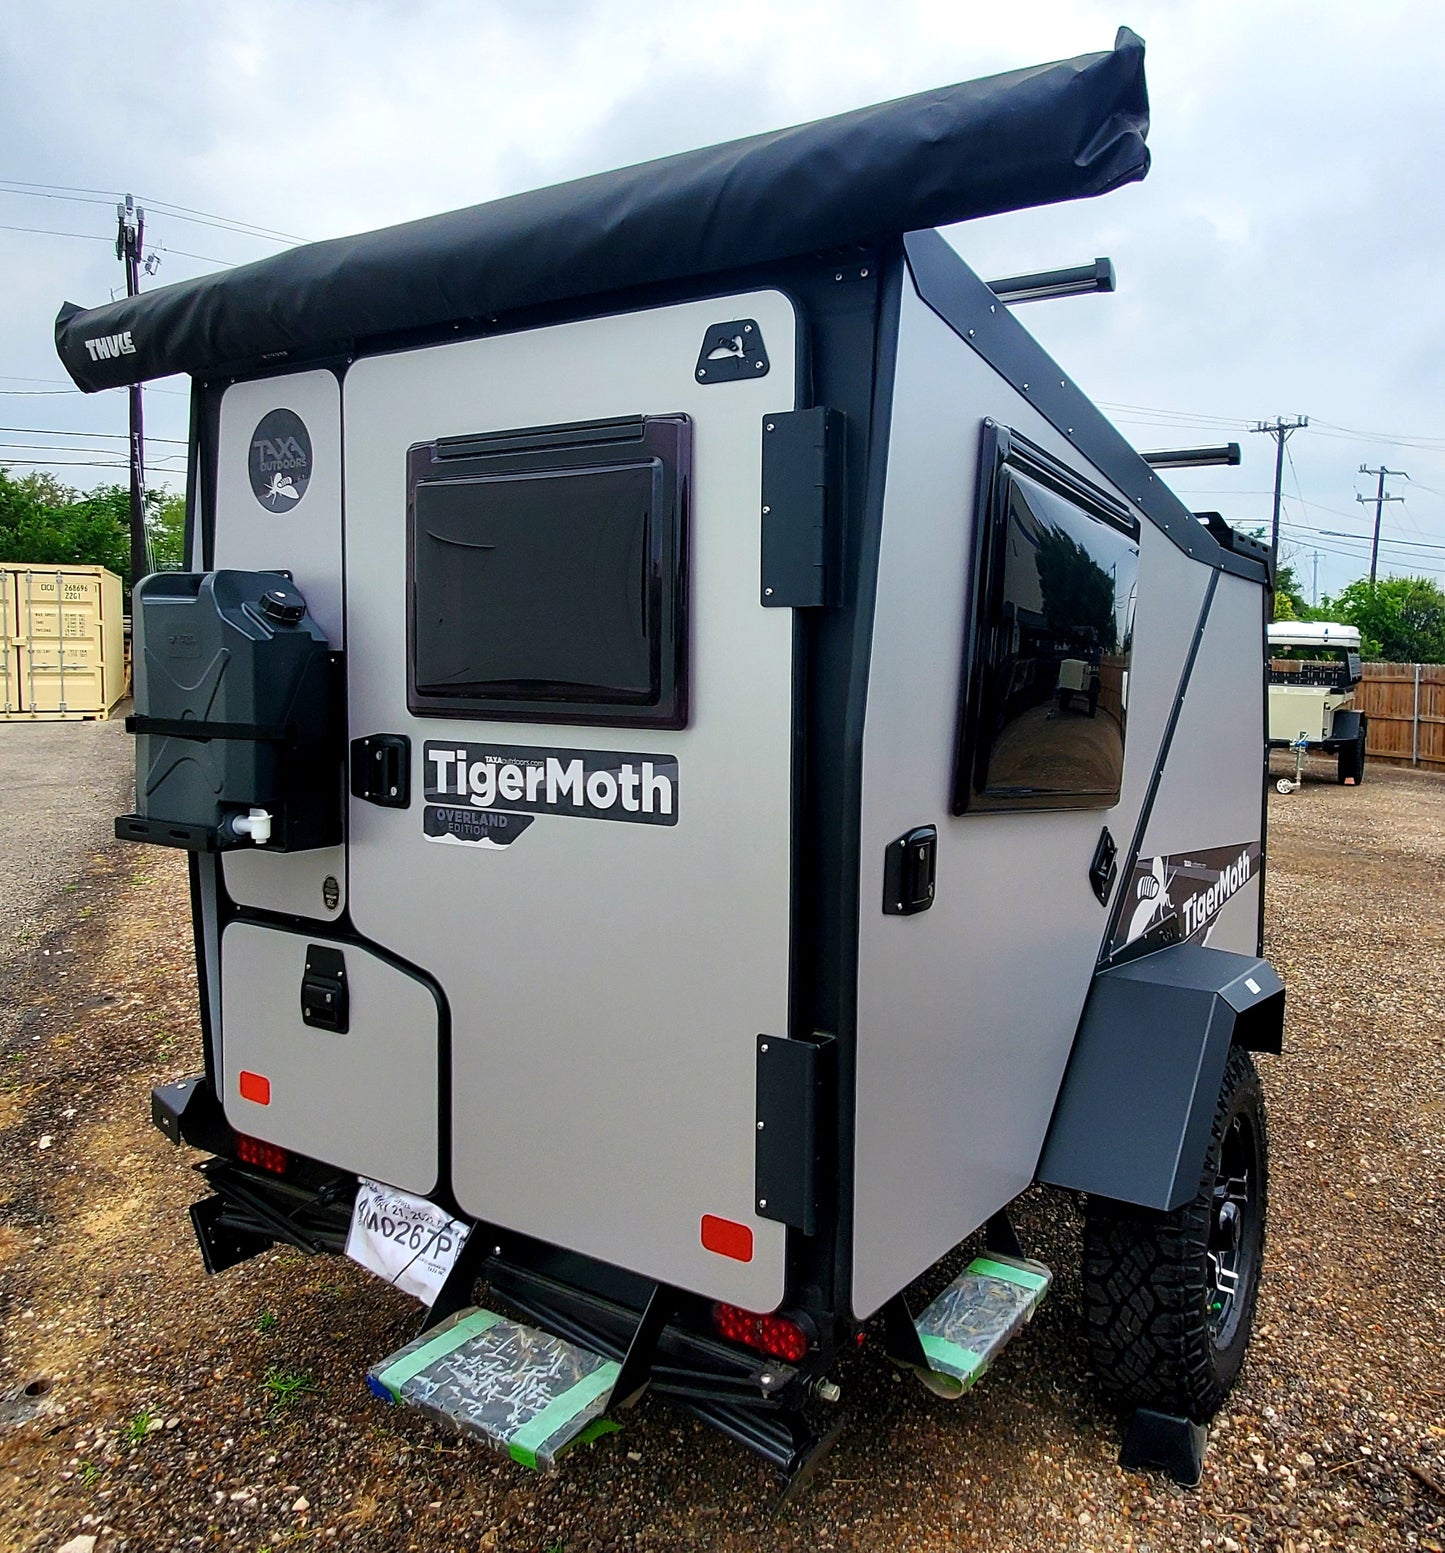 taxa outdoors tigermoth overland offroad air condtion trailer rv for sale near kerrville boerne texas at hawkes outdoors 2102512882